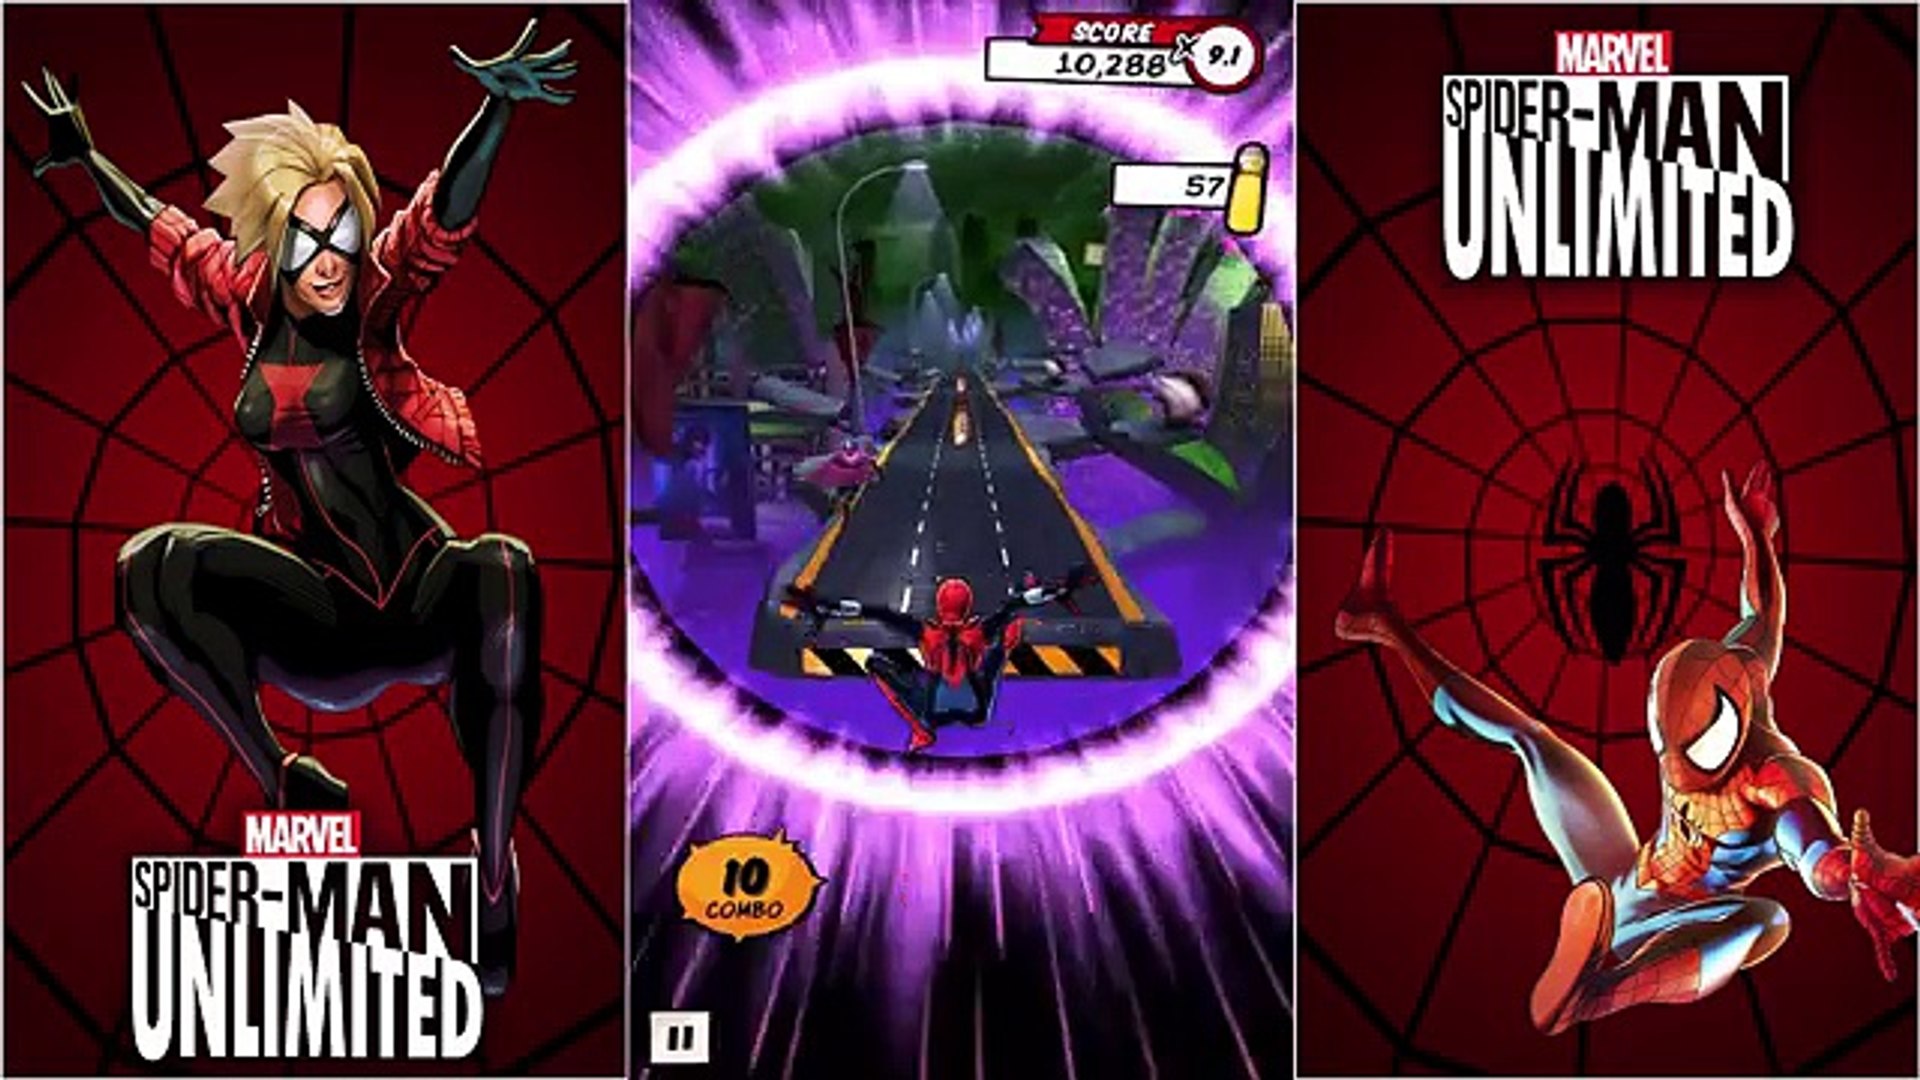 Spider-Man Unlimited - NEW SPIDER-MAN CHARACTERS New Event Stories!